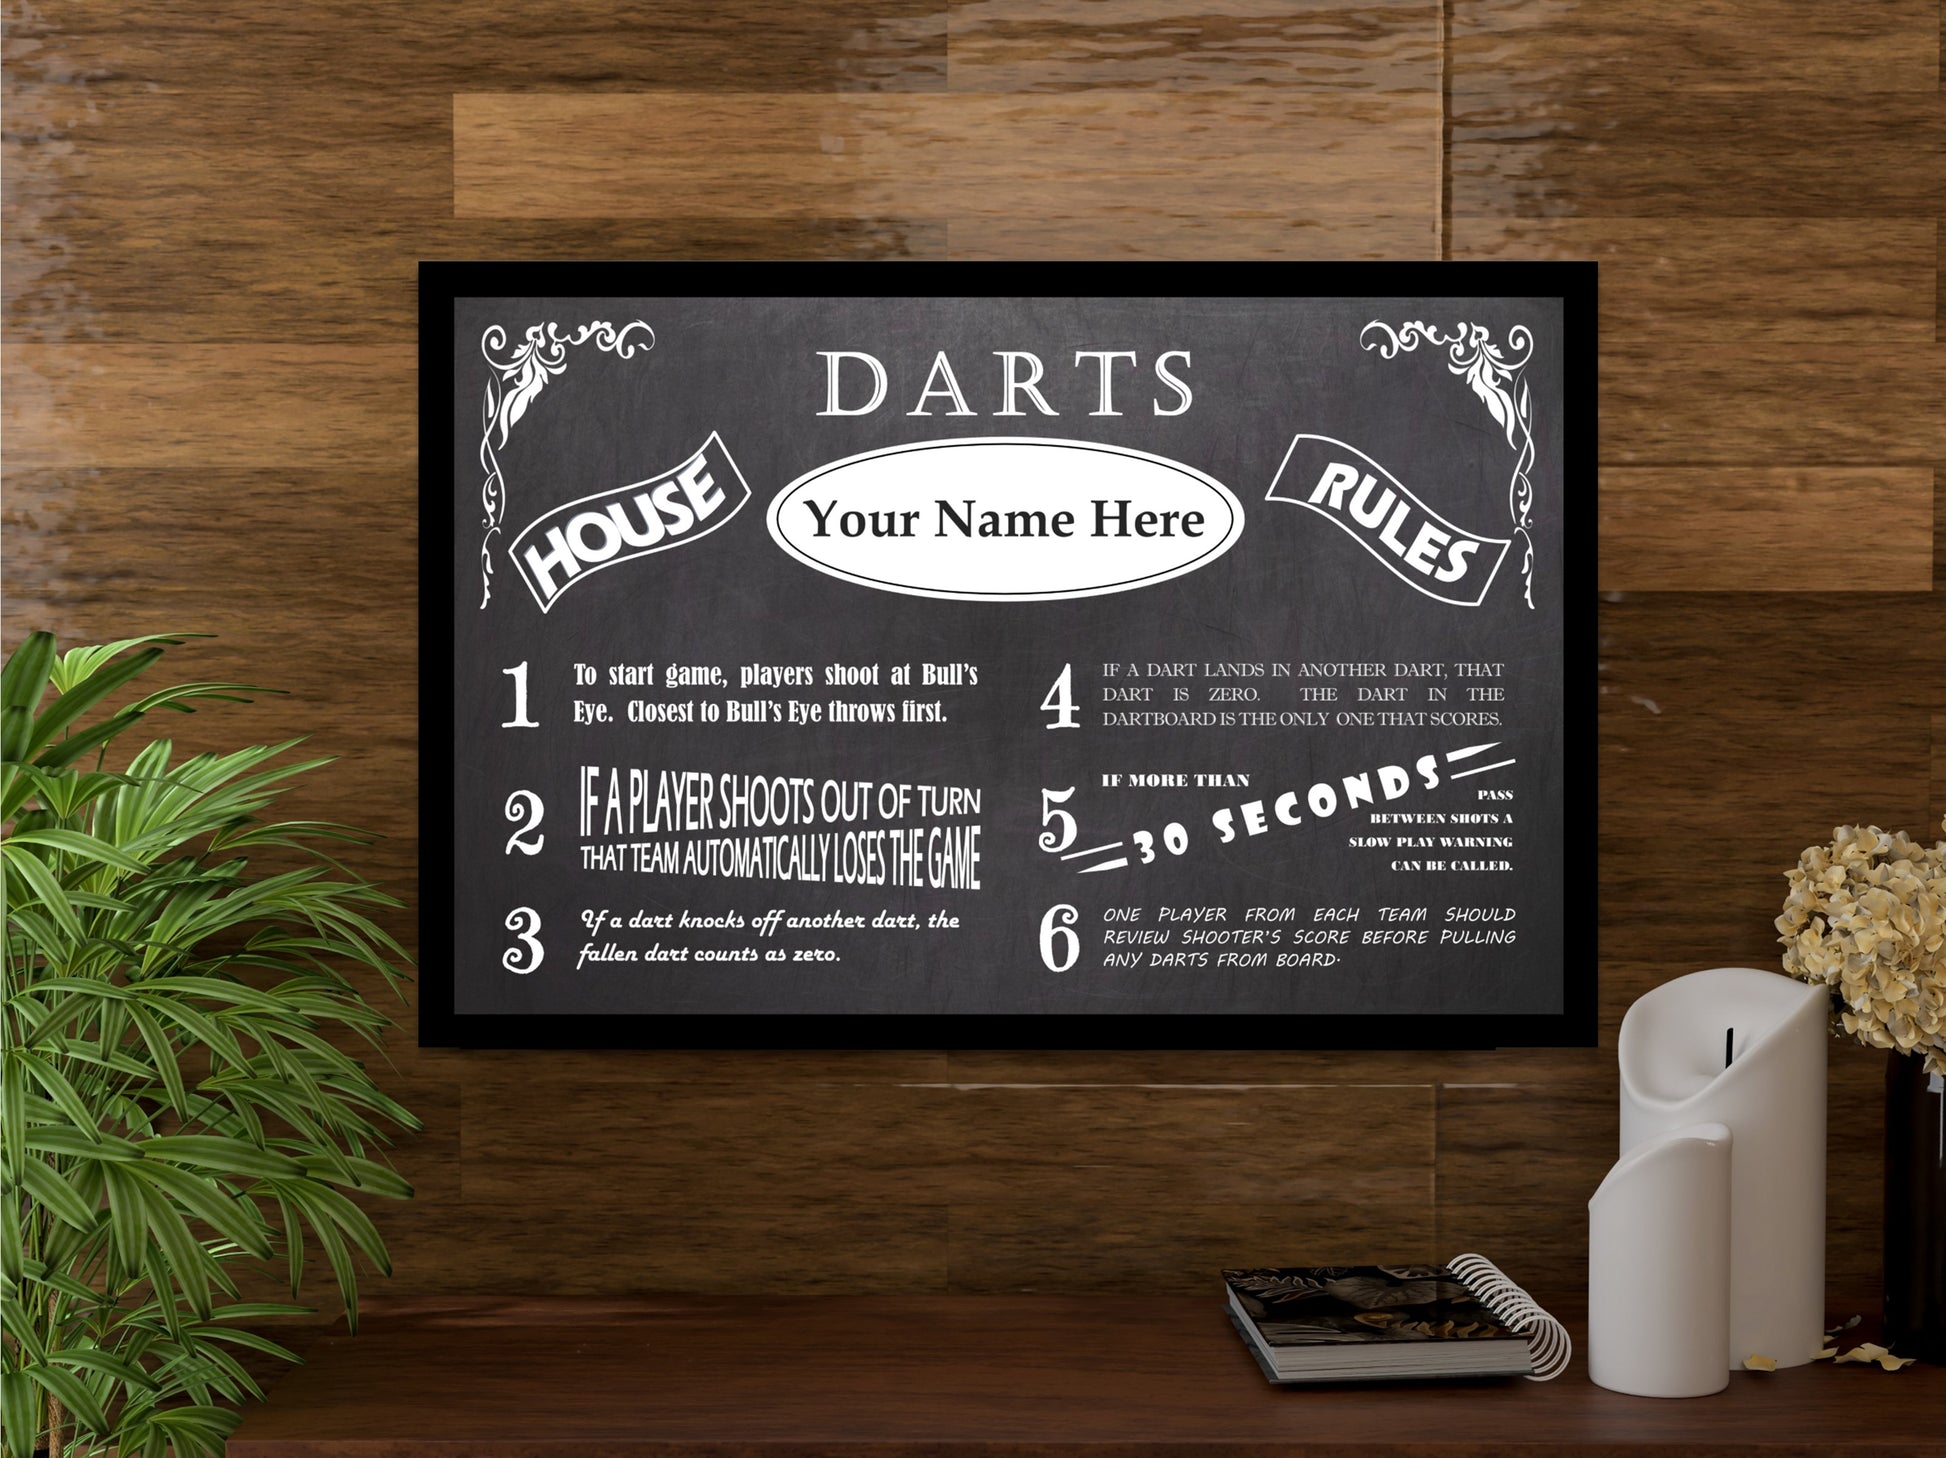 Vintage Darts Personalized House Rules Poster Customized With Your Name!